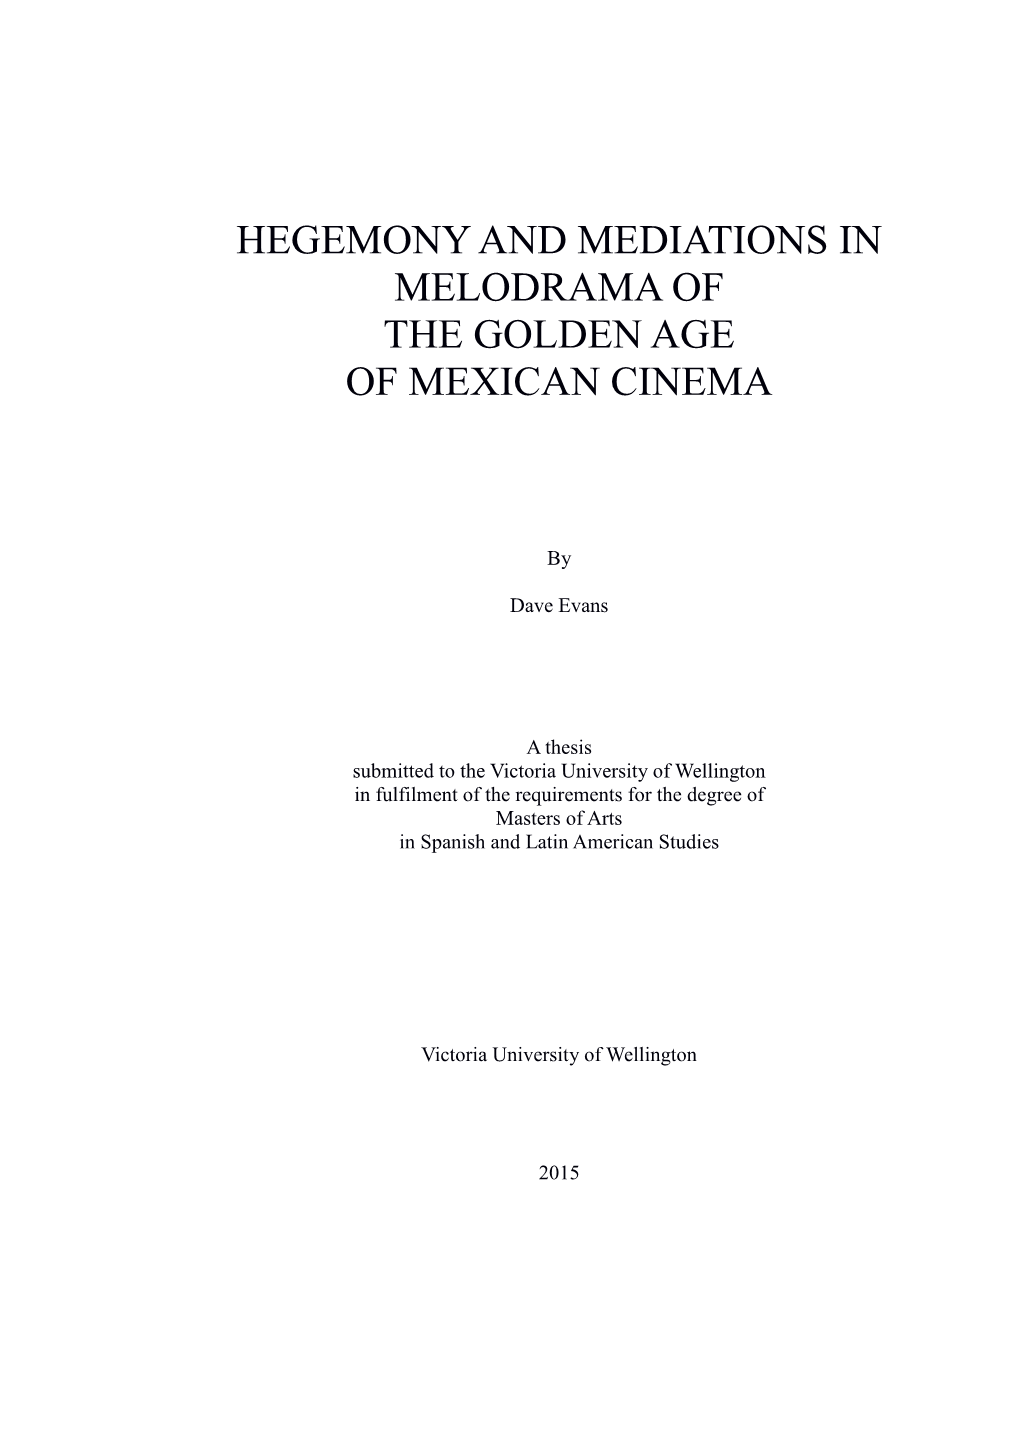 Hegemony and Mediations in Melodrama of the Golden Age of Mexican Cinema